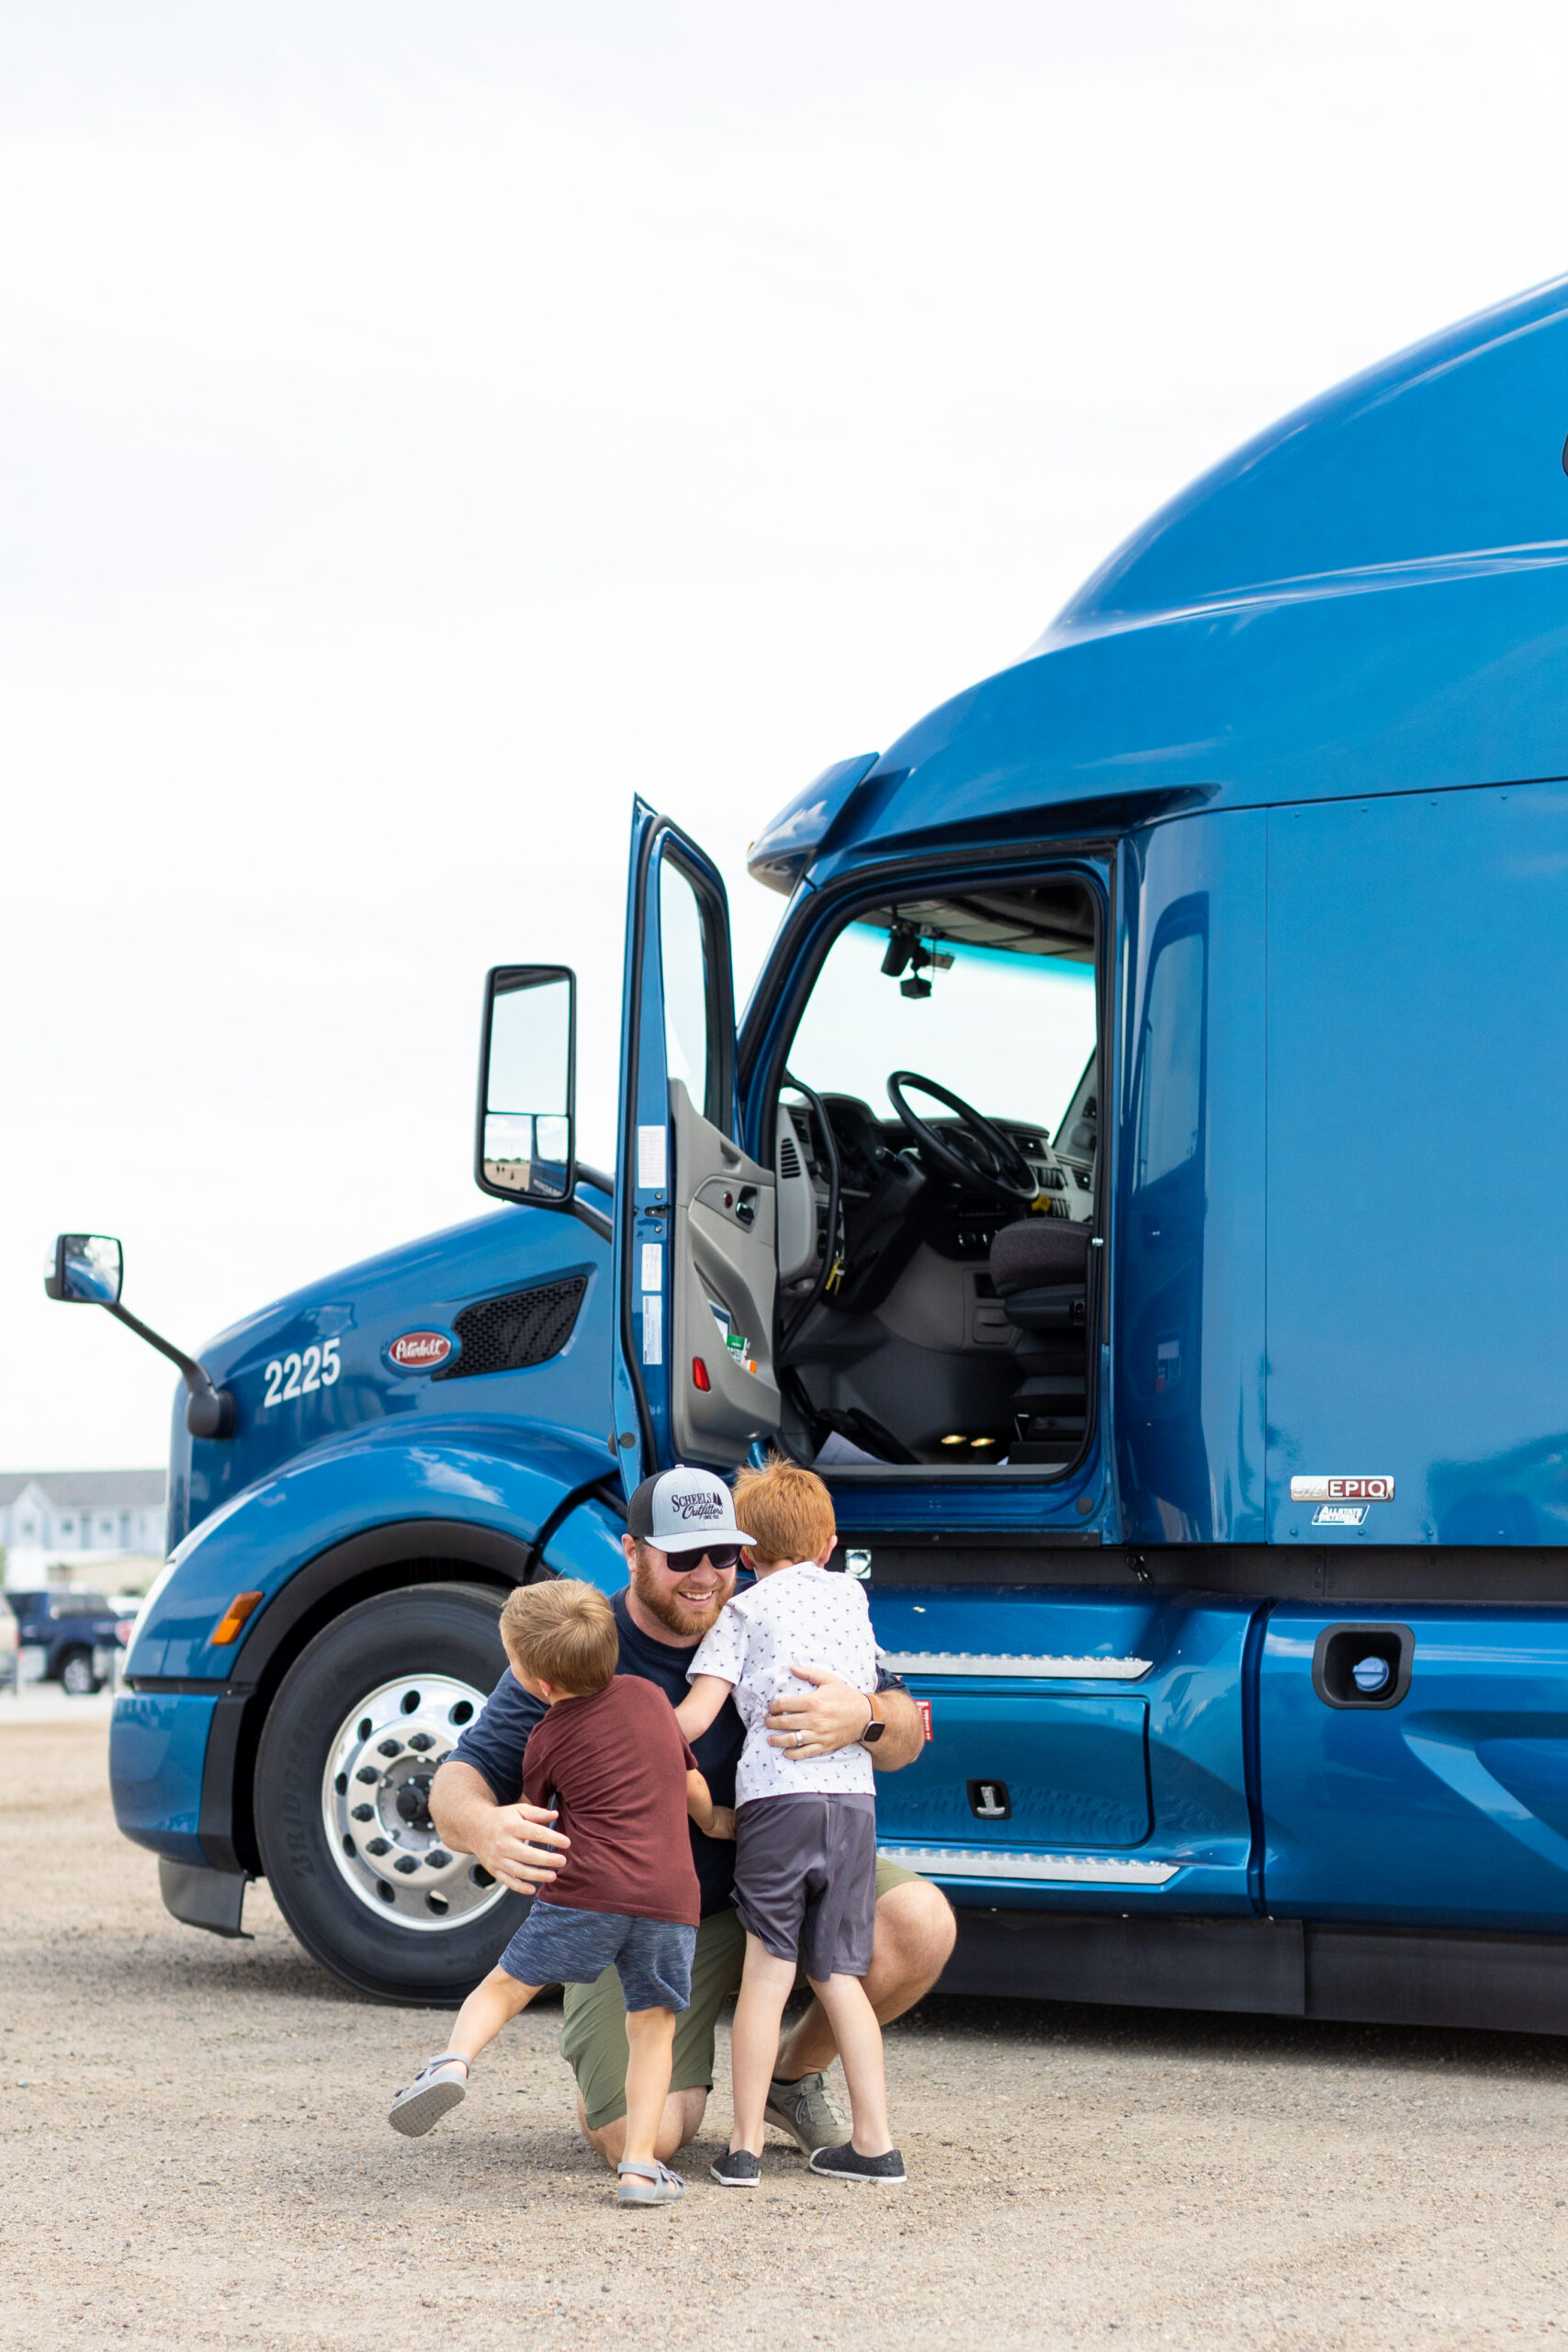 FINDING THE RIGHT TRUCKING COMPANY